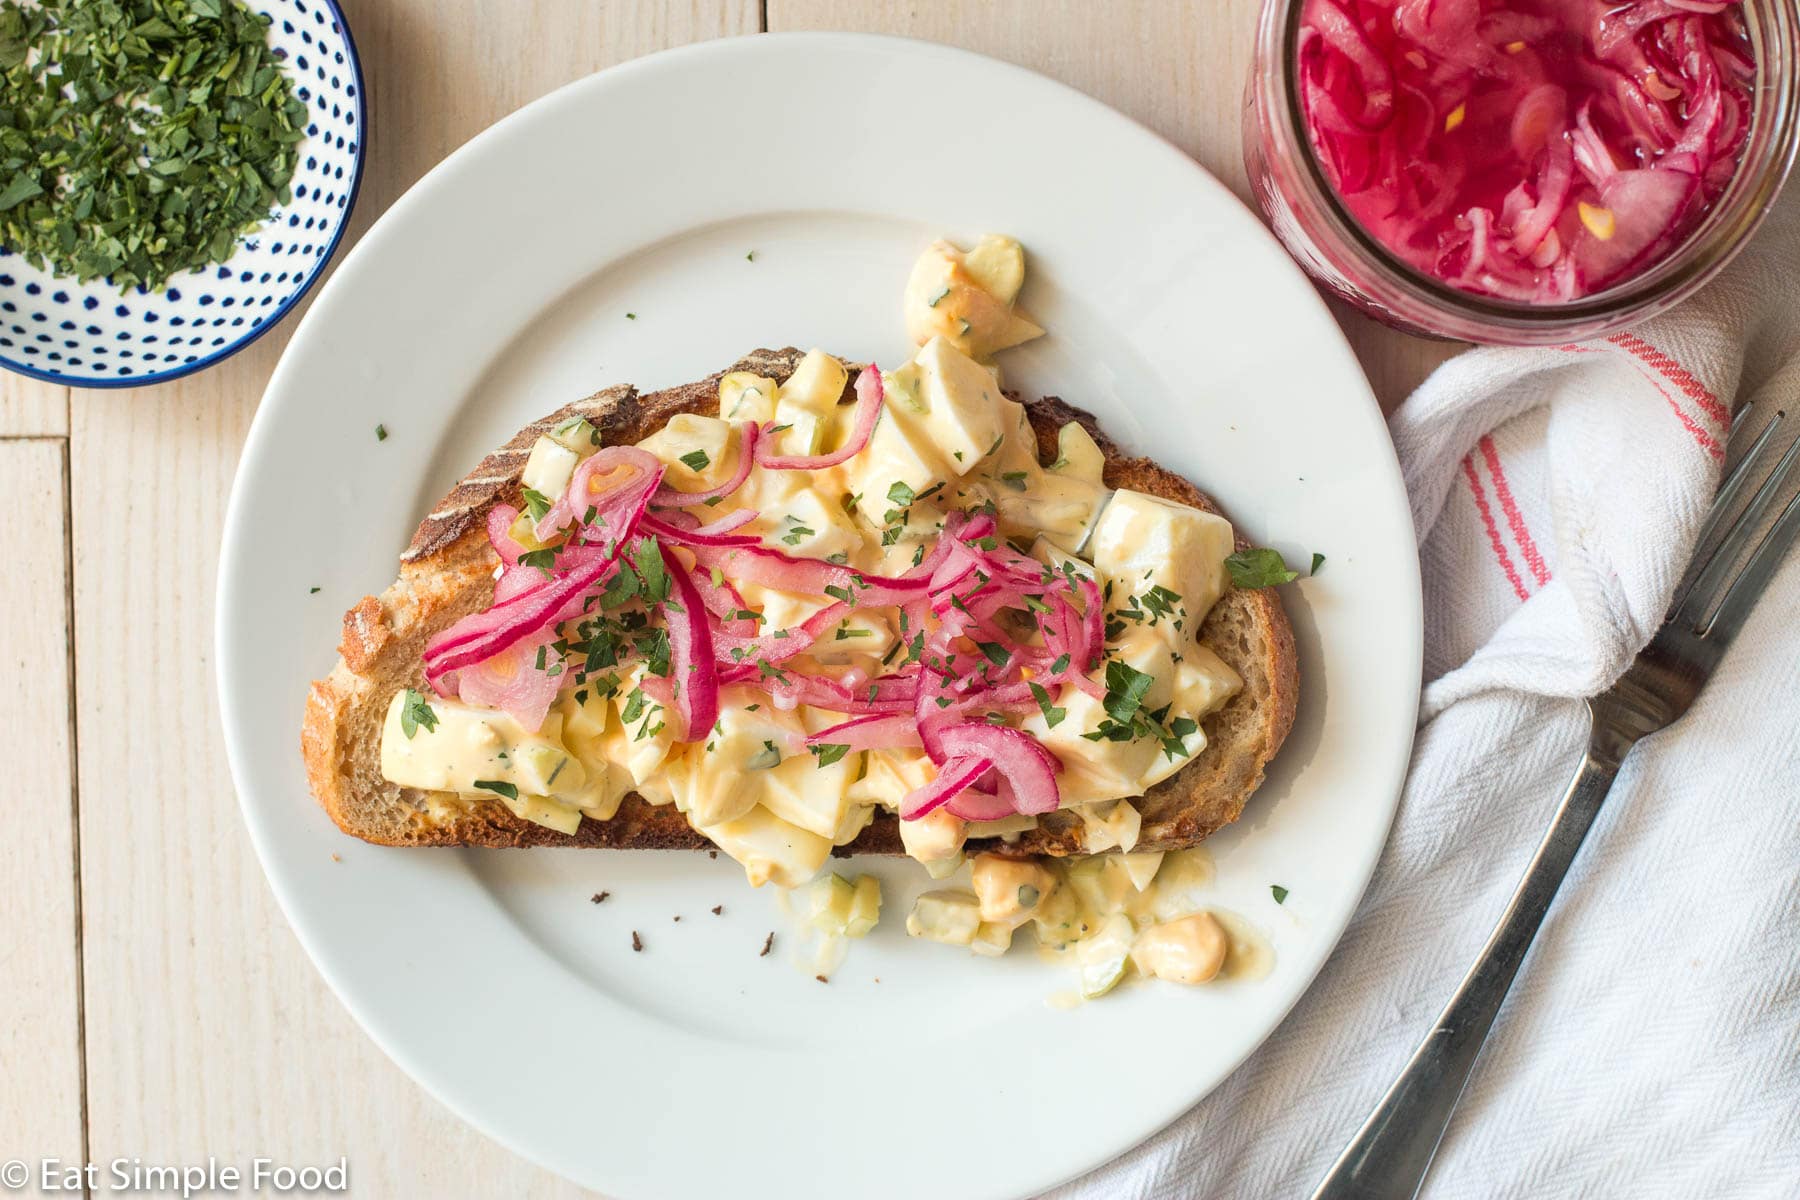 Top view of toast topped with a chunky egg salad and pickled red onions on a white plate with napkin and fork on the side.